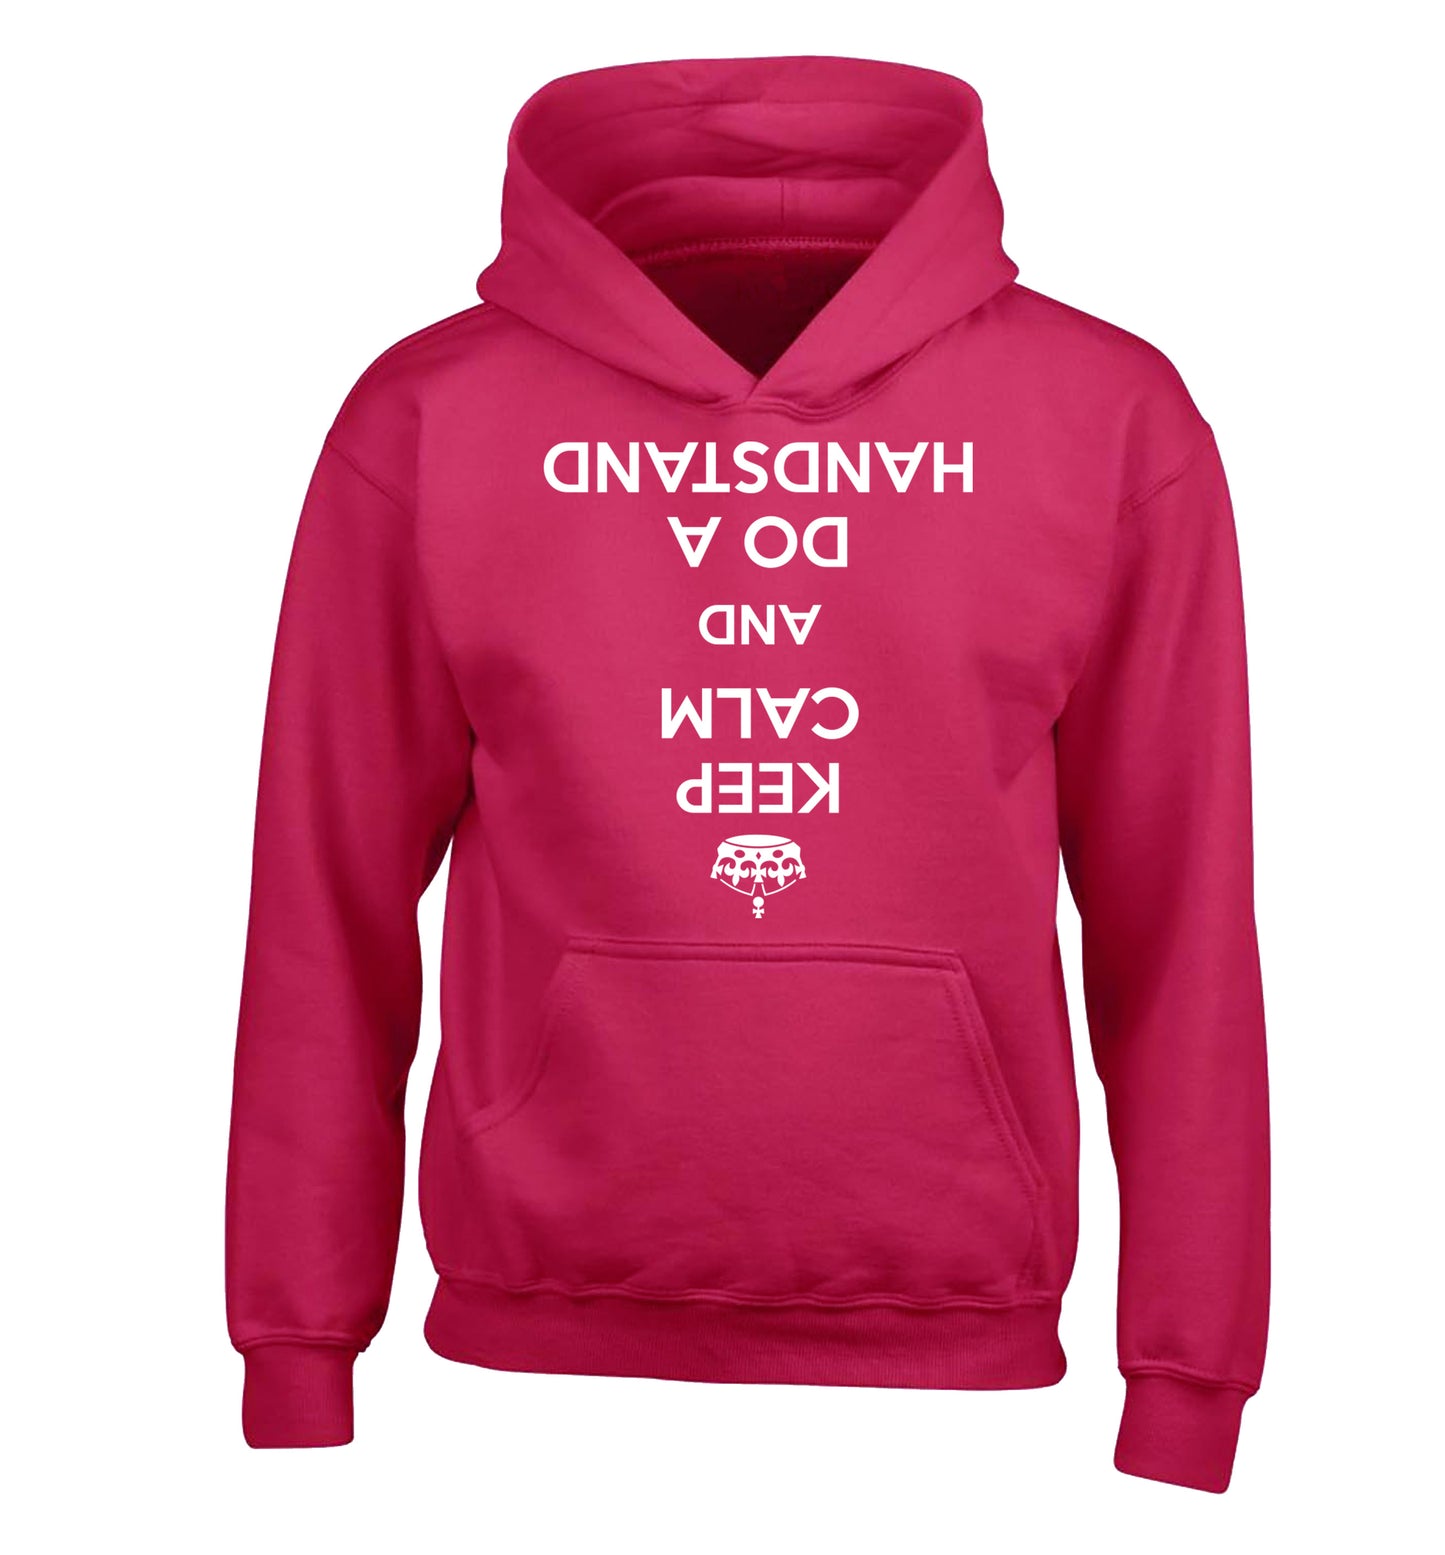 Keep calm and do a handstand children's pink hoodie 12-13 Years